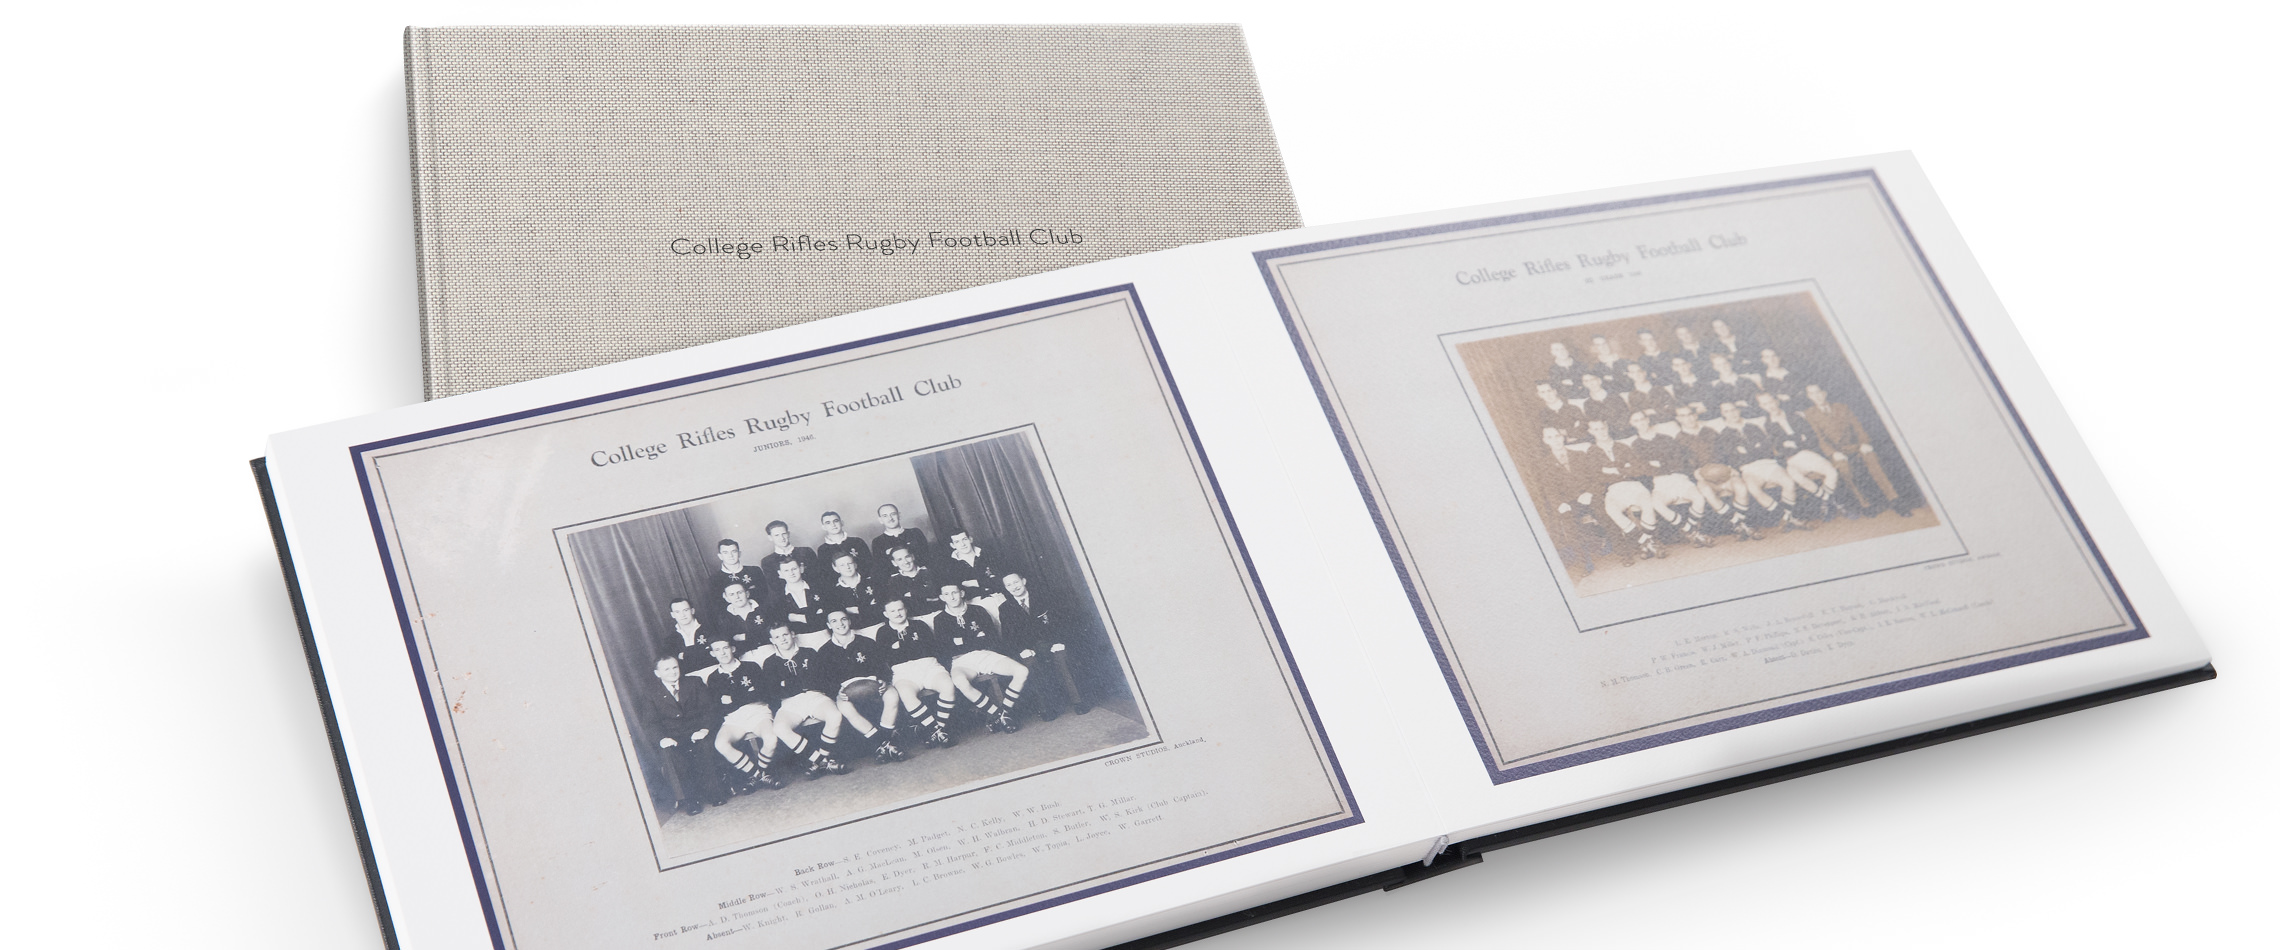 Open Premium Photo Book displaying old black and white photos of College Rifles Rugby Football Club